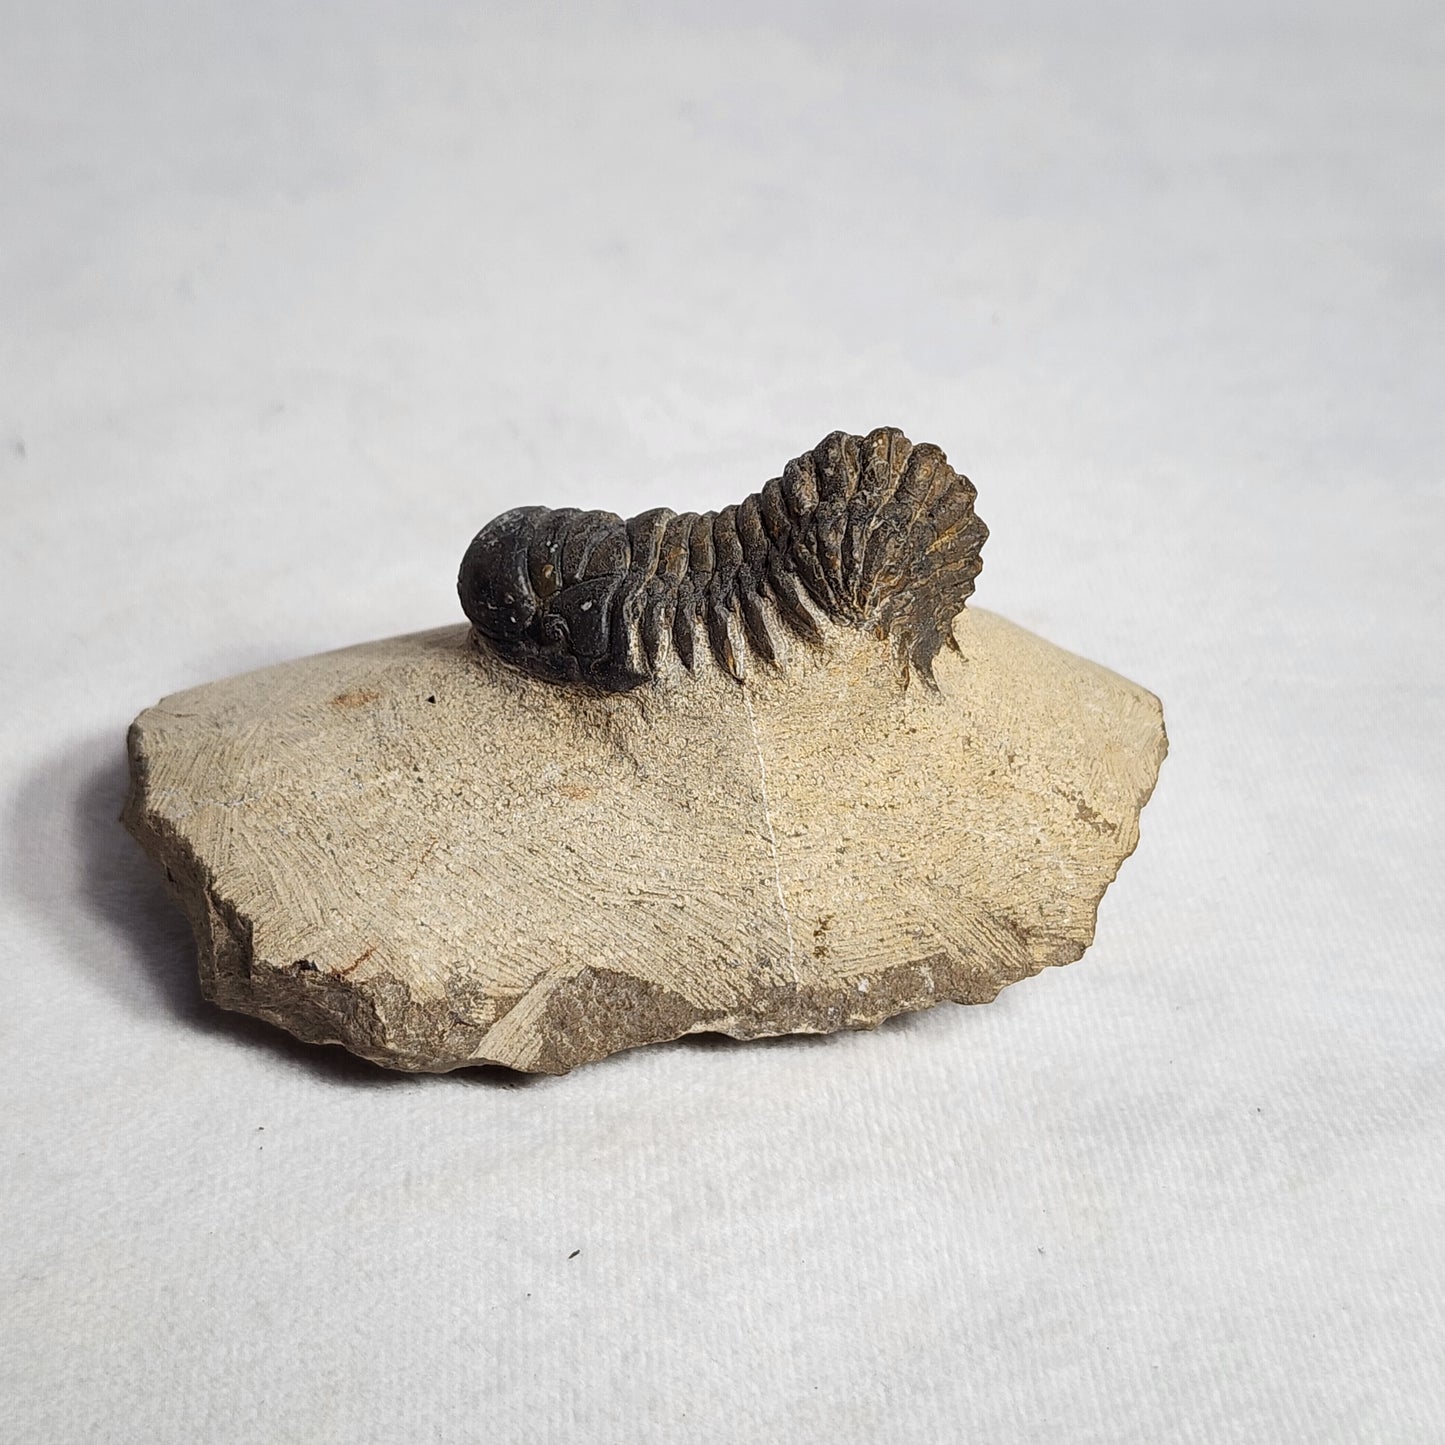 Appealing Trilobite from Morocco